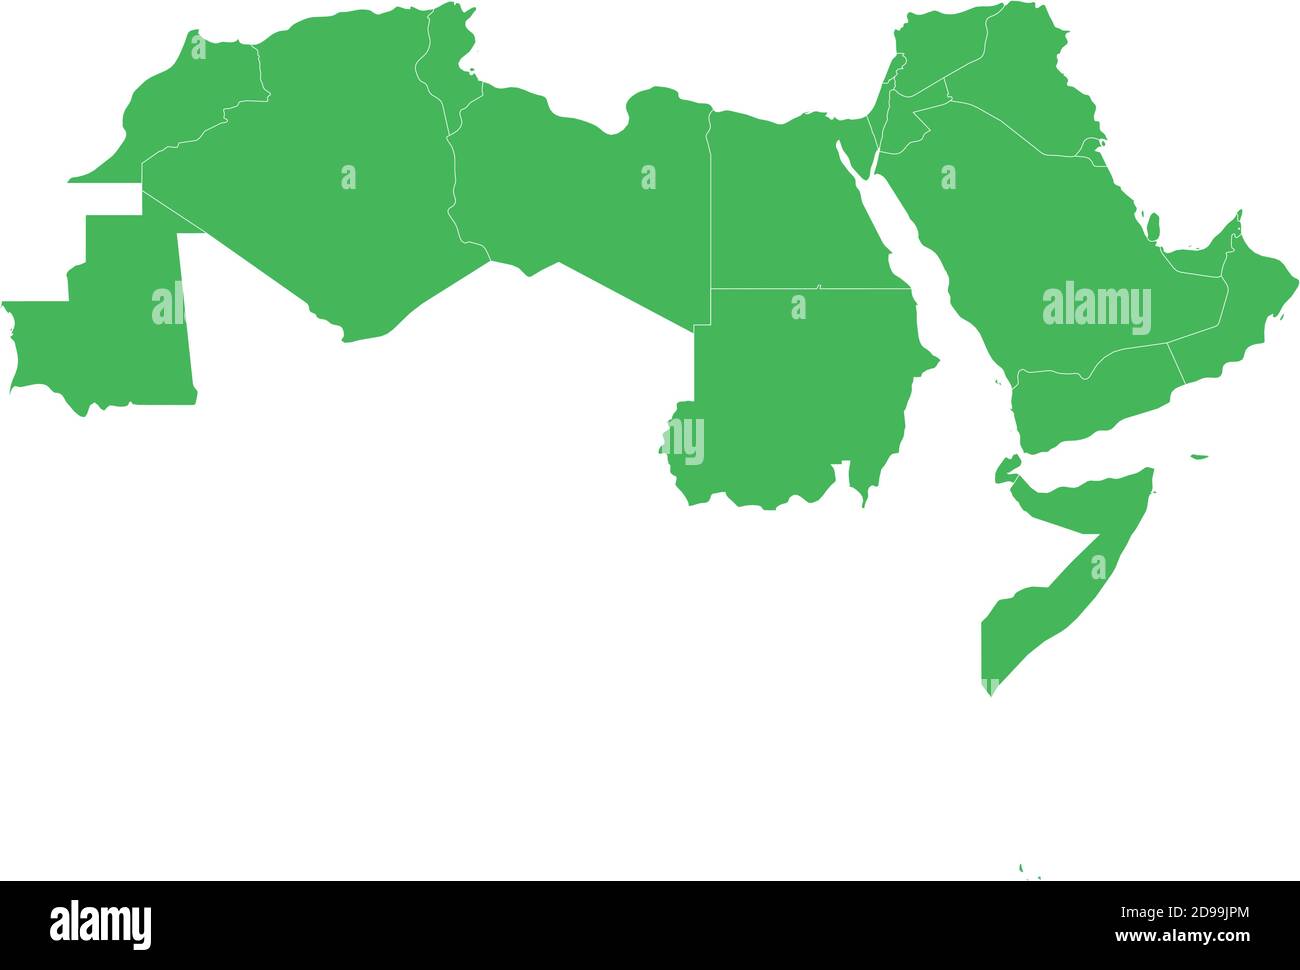 Arab World states. Blank political map of 22 arabic-speaking countries of the Arab League. Northern Africa and Middle East region. Vector illustration. Stock Vector